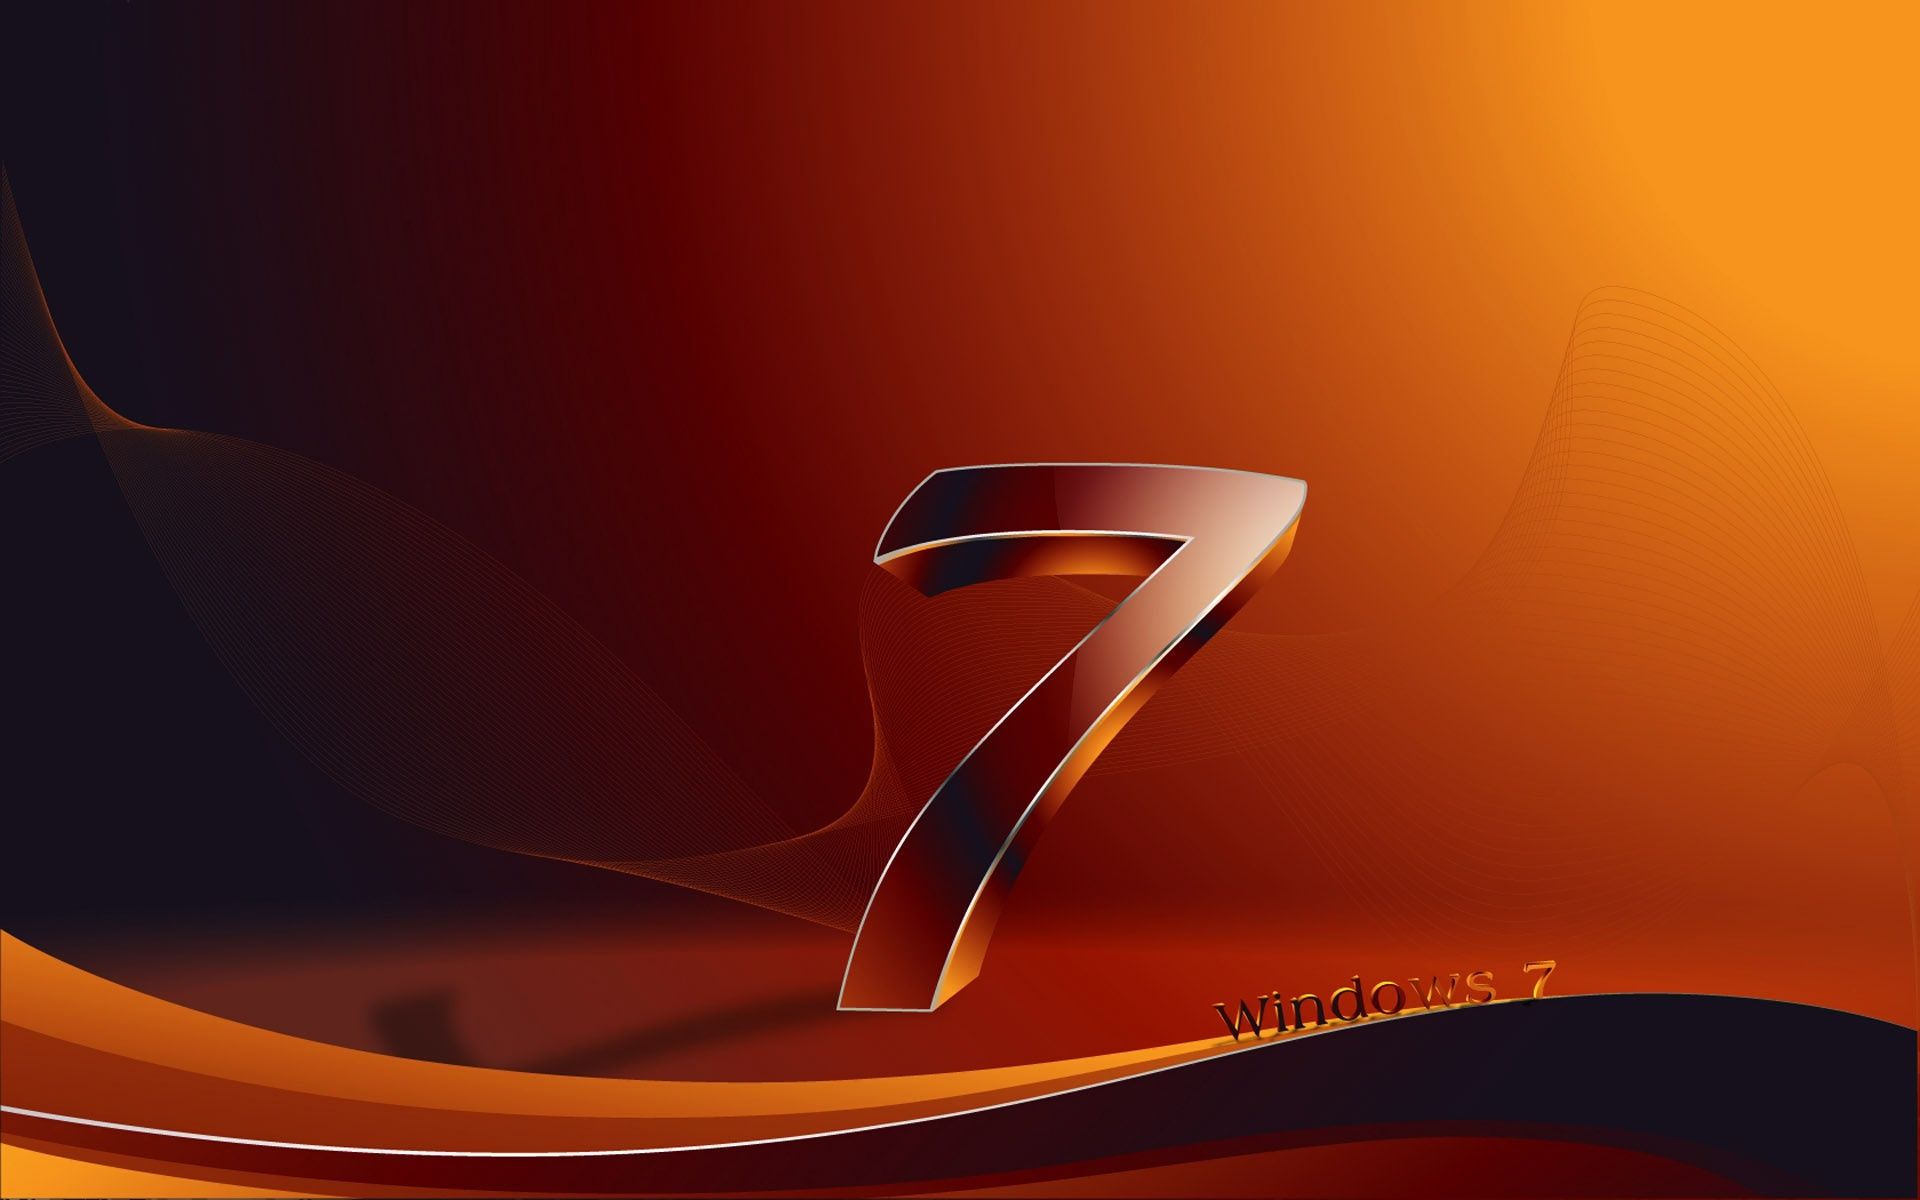 Windows 7 Professional Wallpapers HD